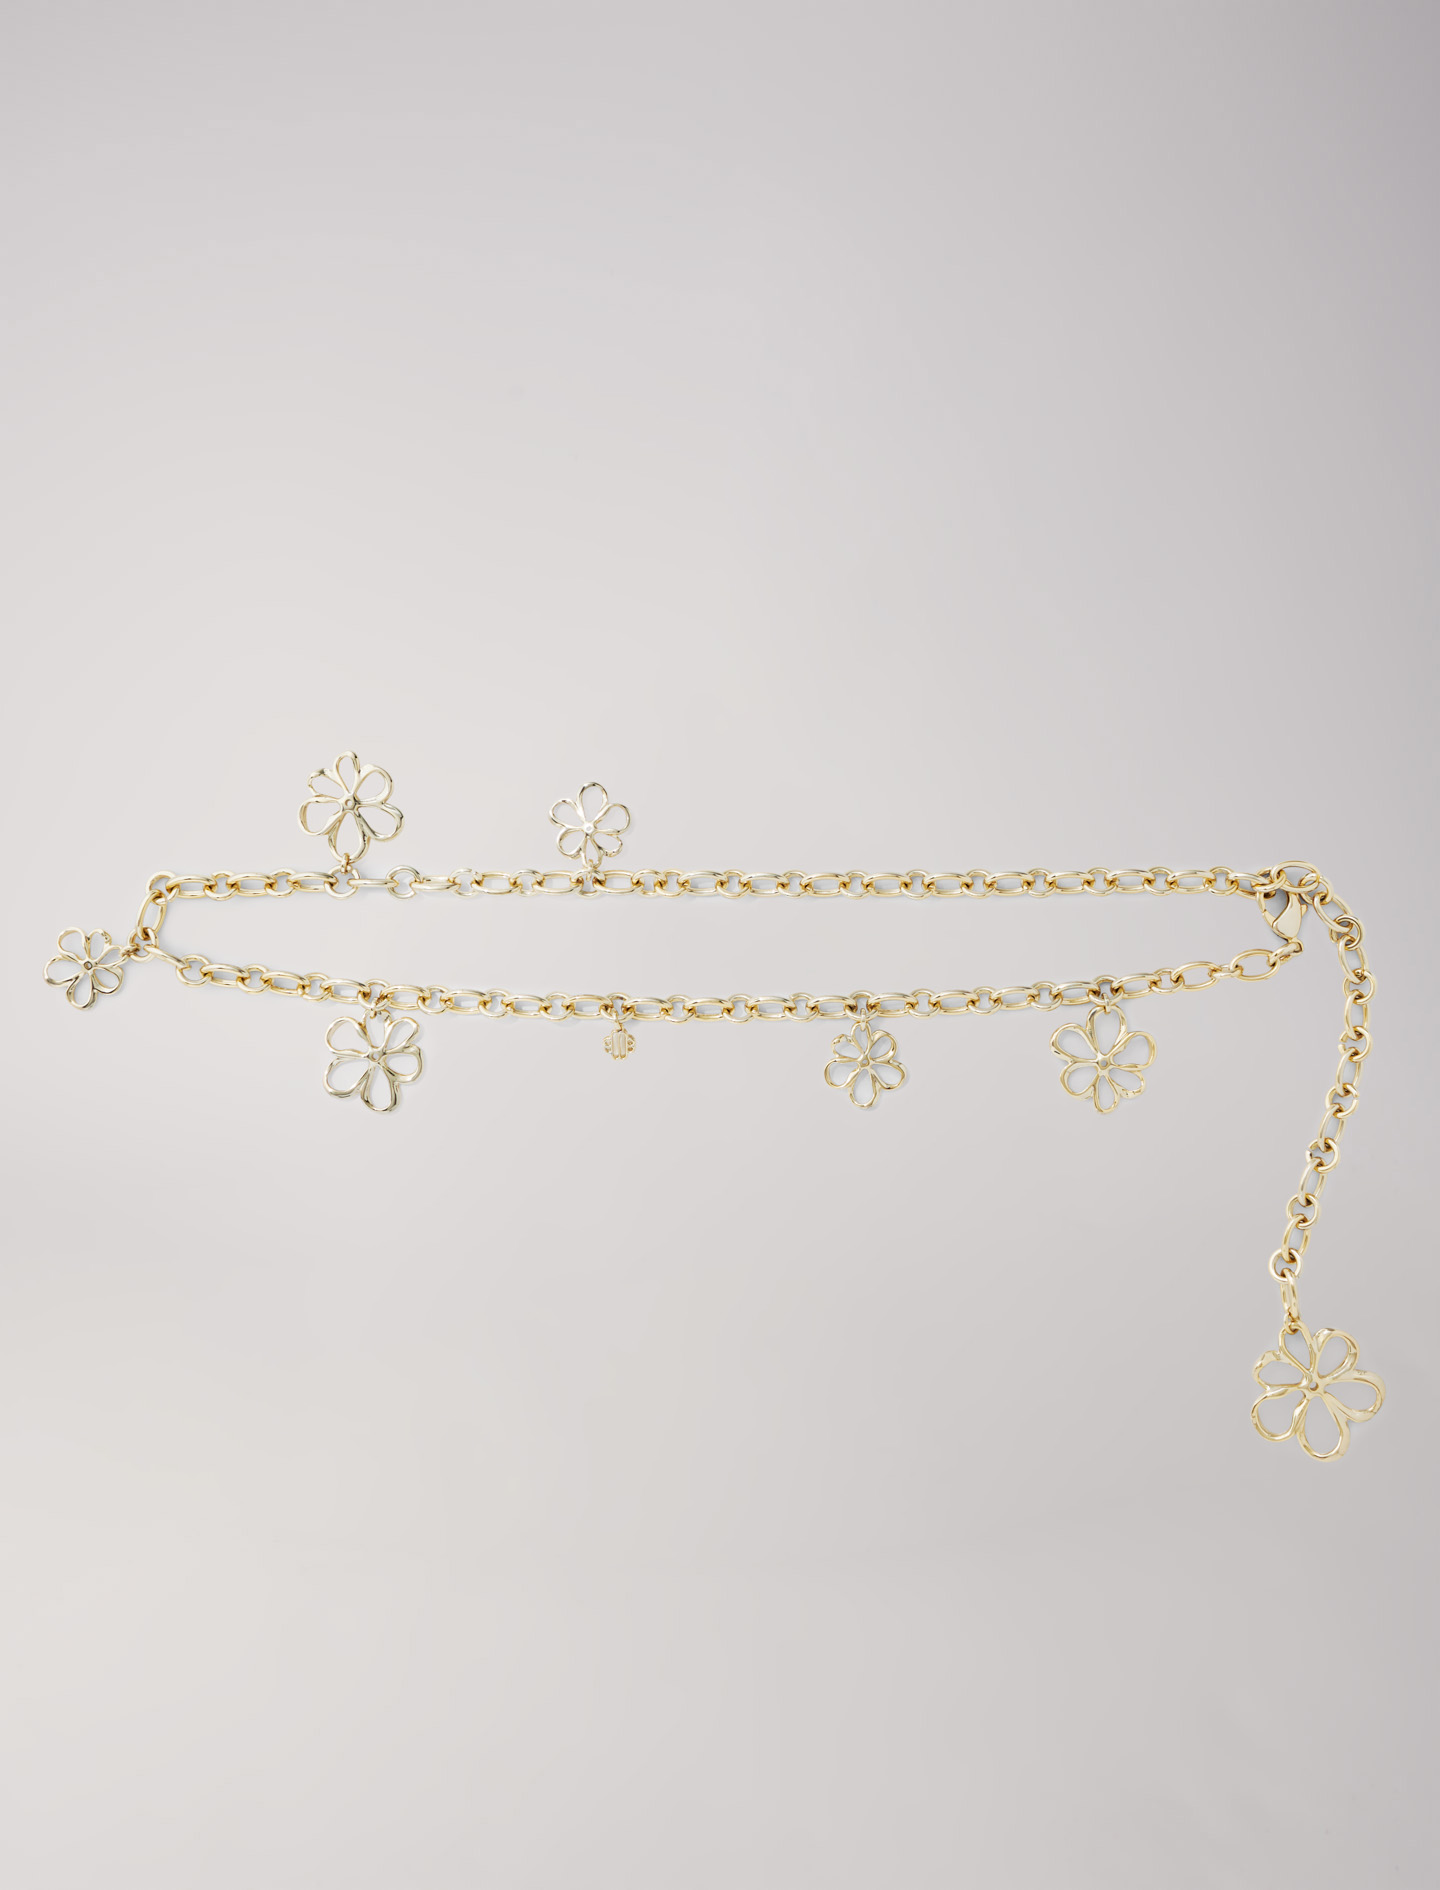 Mixte's iron Chain belt with flowers for Spring/Summer, size Mixte-Belts-US L / FR 3, in color Gold / Yellow